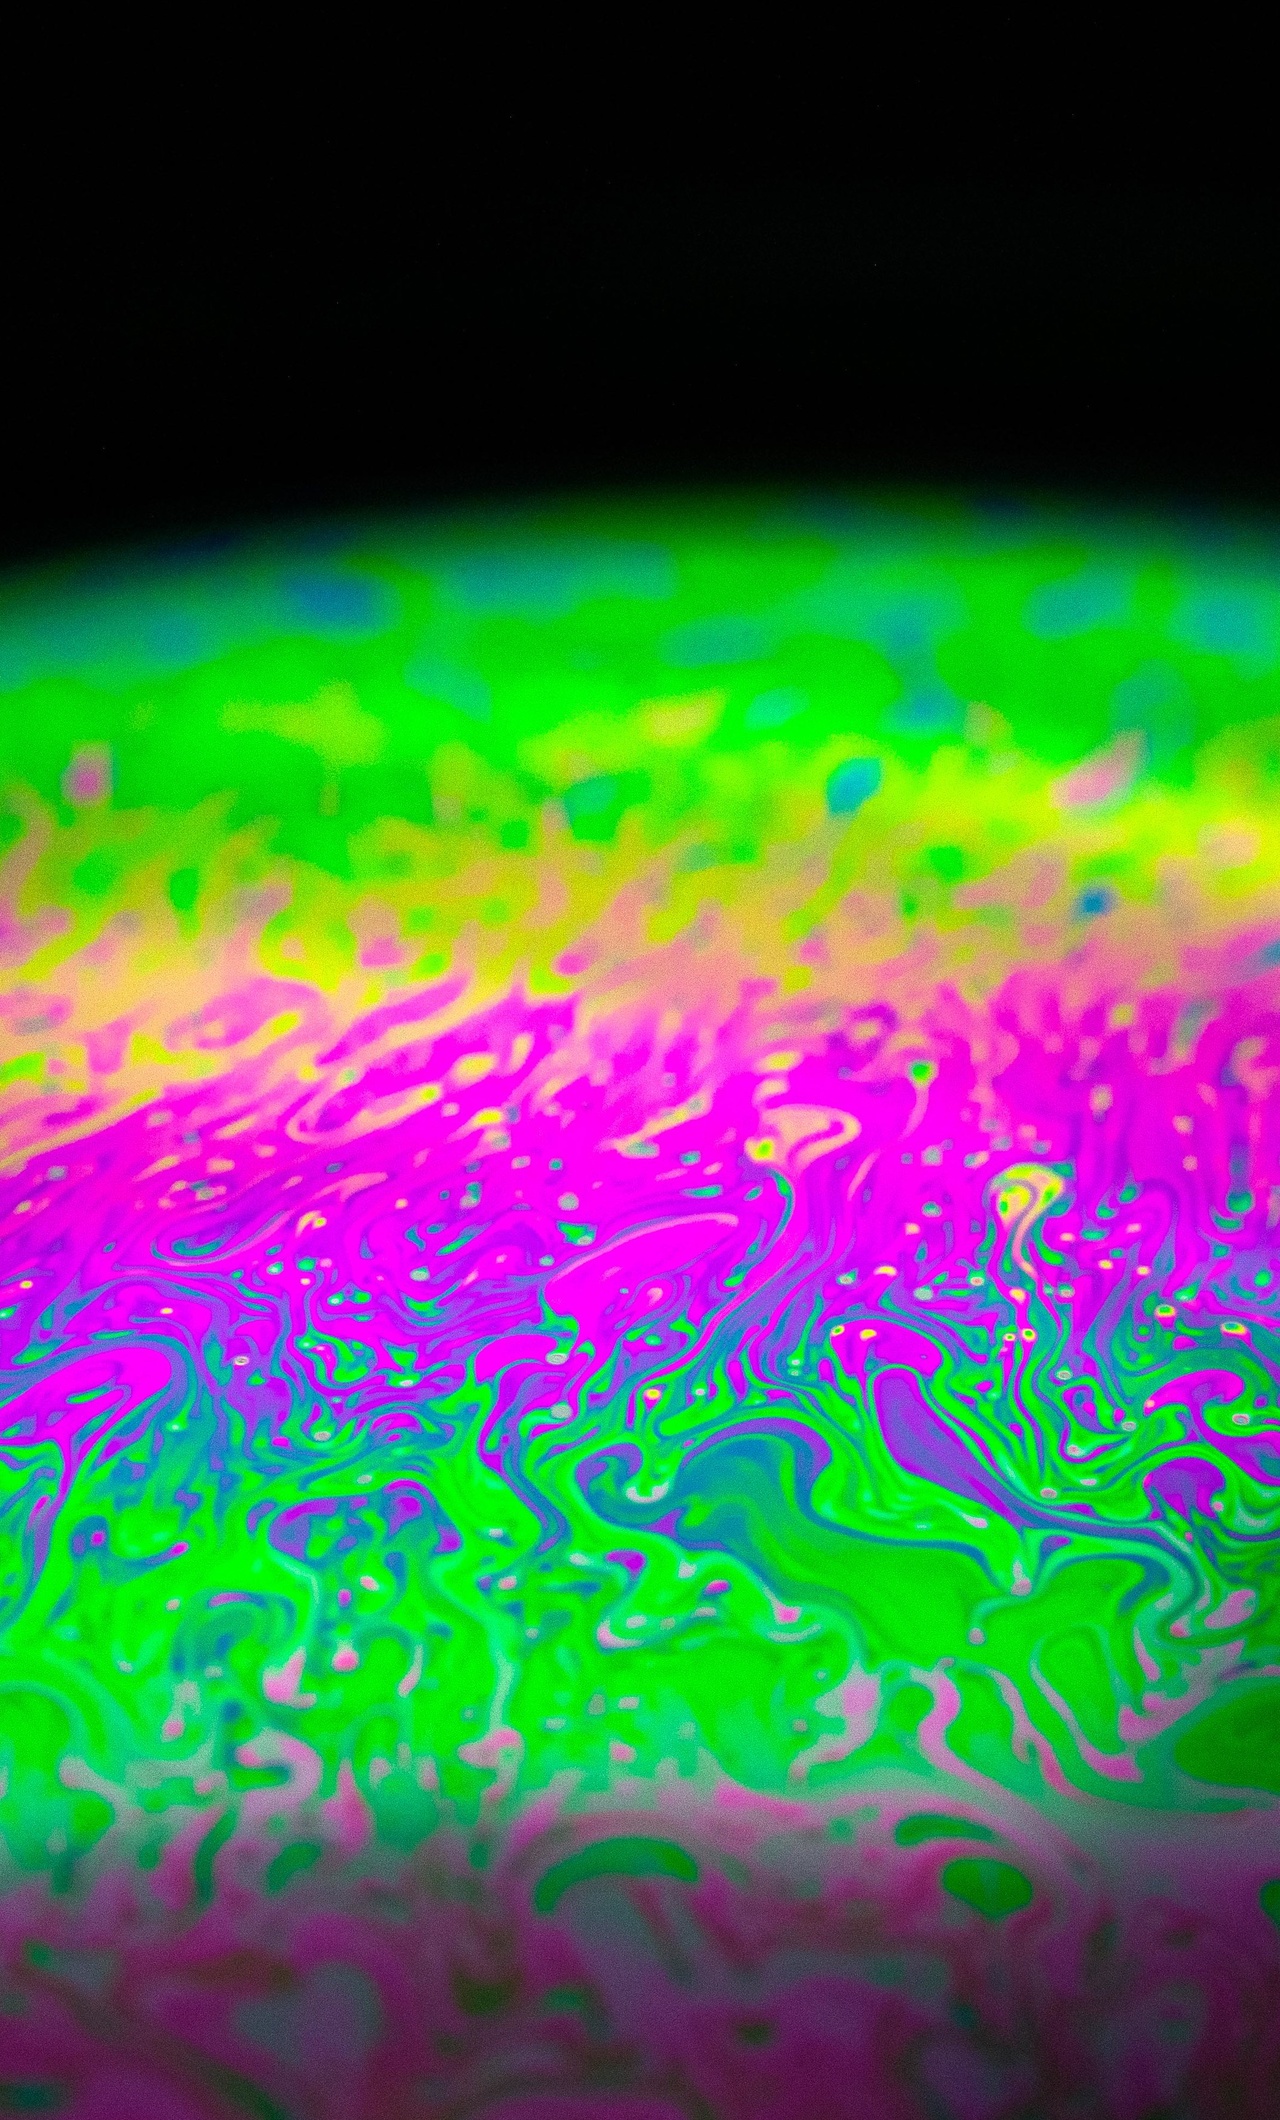 Psychedelic Bubbles 5k iPhone HD 4k Wallpaper, Image, Background, Photo and Picture